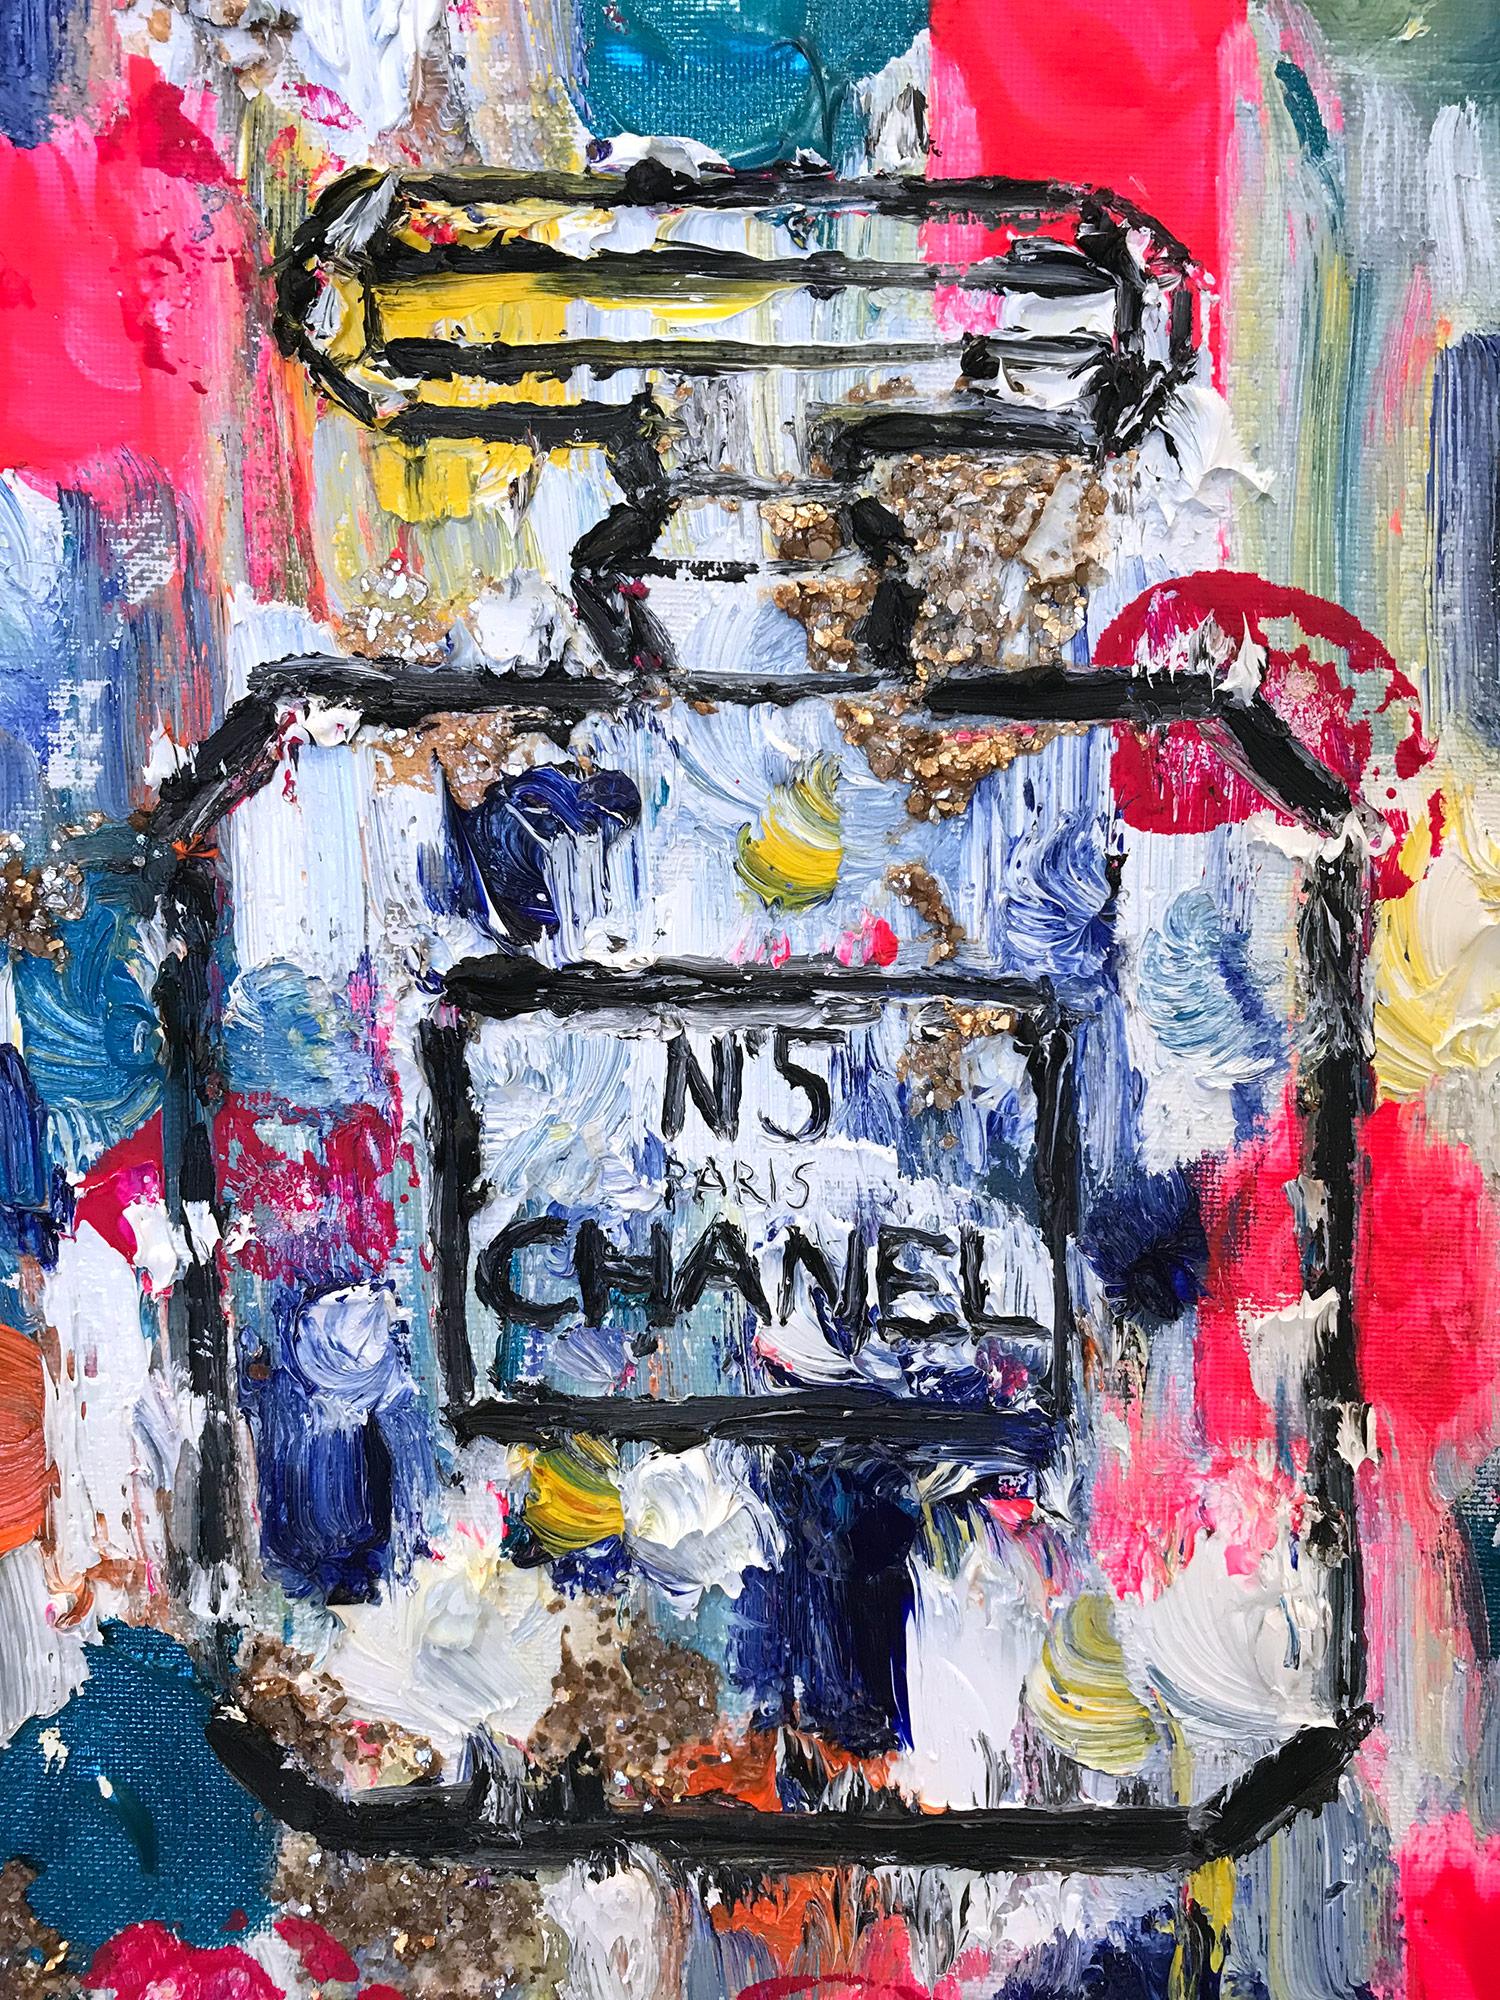 Dripping Dots, Monte Carlo in N5 Chanel - Contemporary Painting by Cindy Shaoul